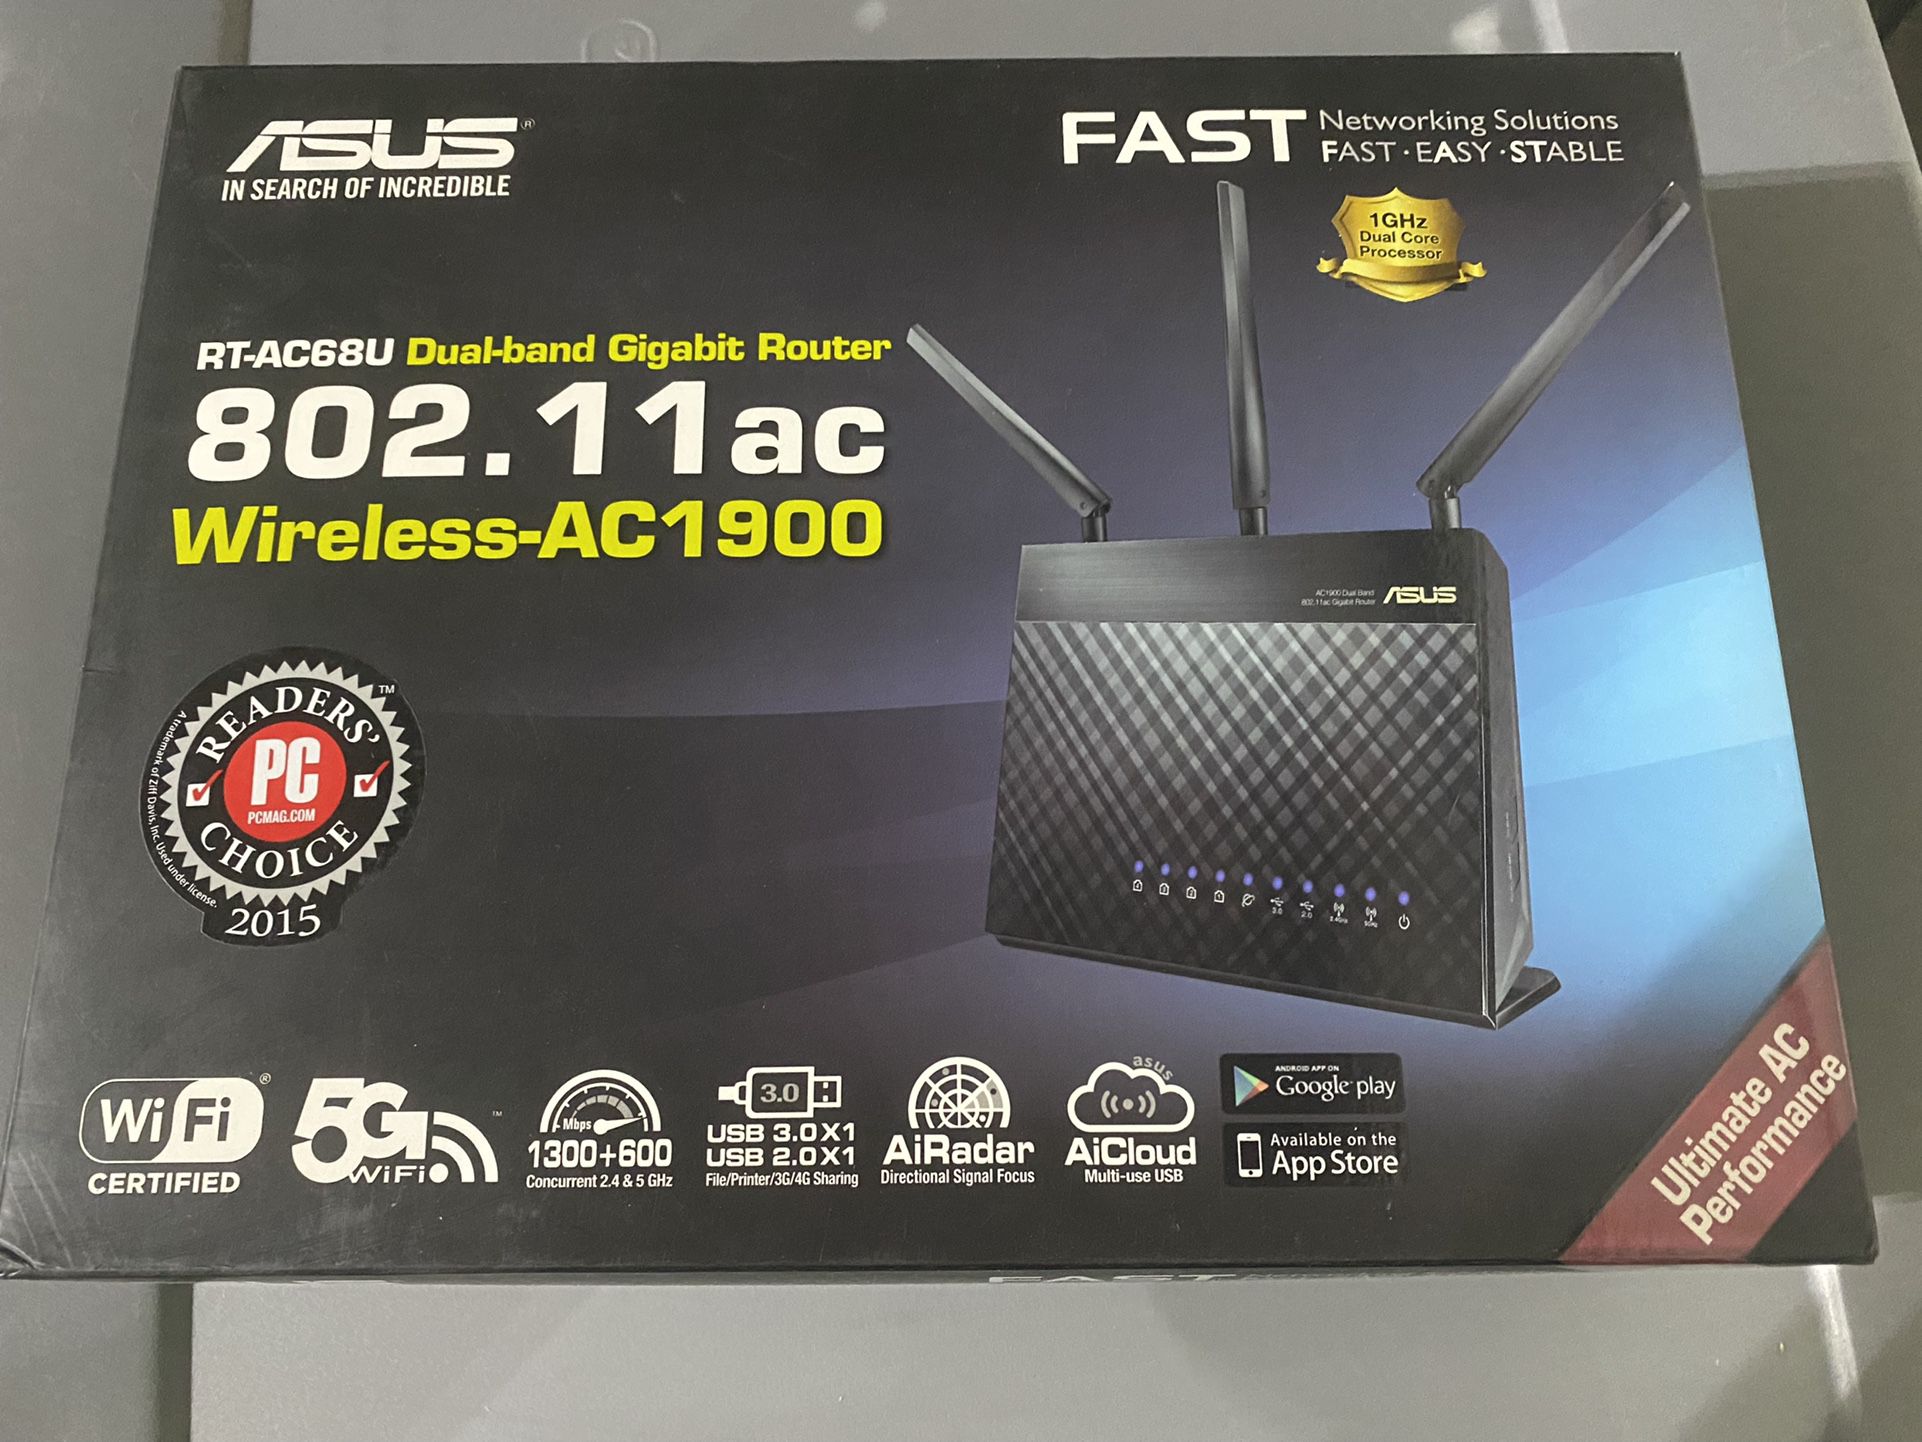 ASUS AC1900 WiFi Gaming Router (RT-AC68U) - Dual Band Gigabit Wireless Internet Router, Gaming & Streaming, AiMesh Compatible